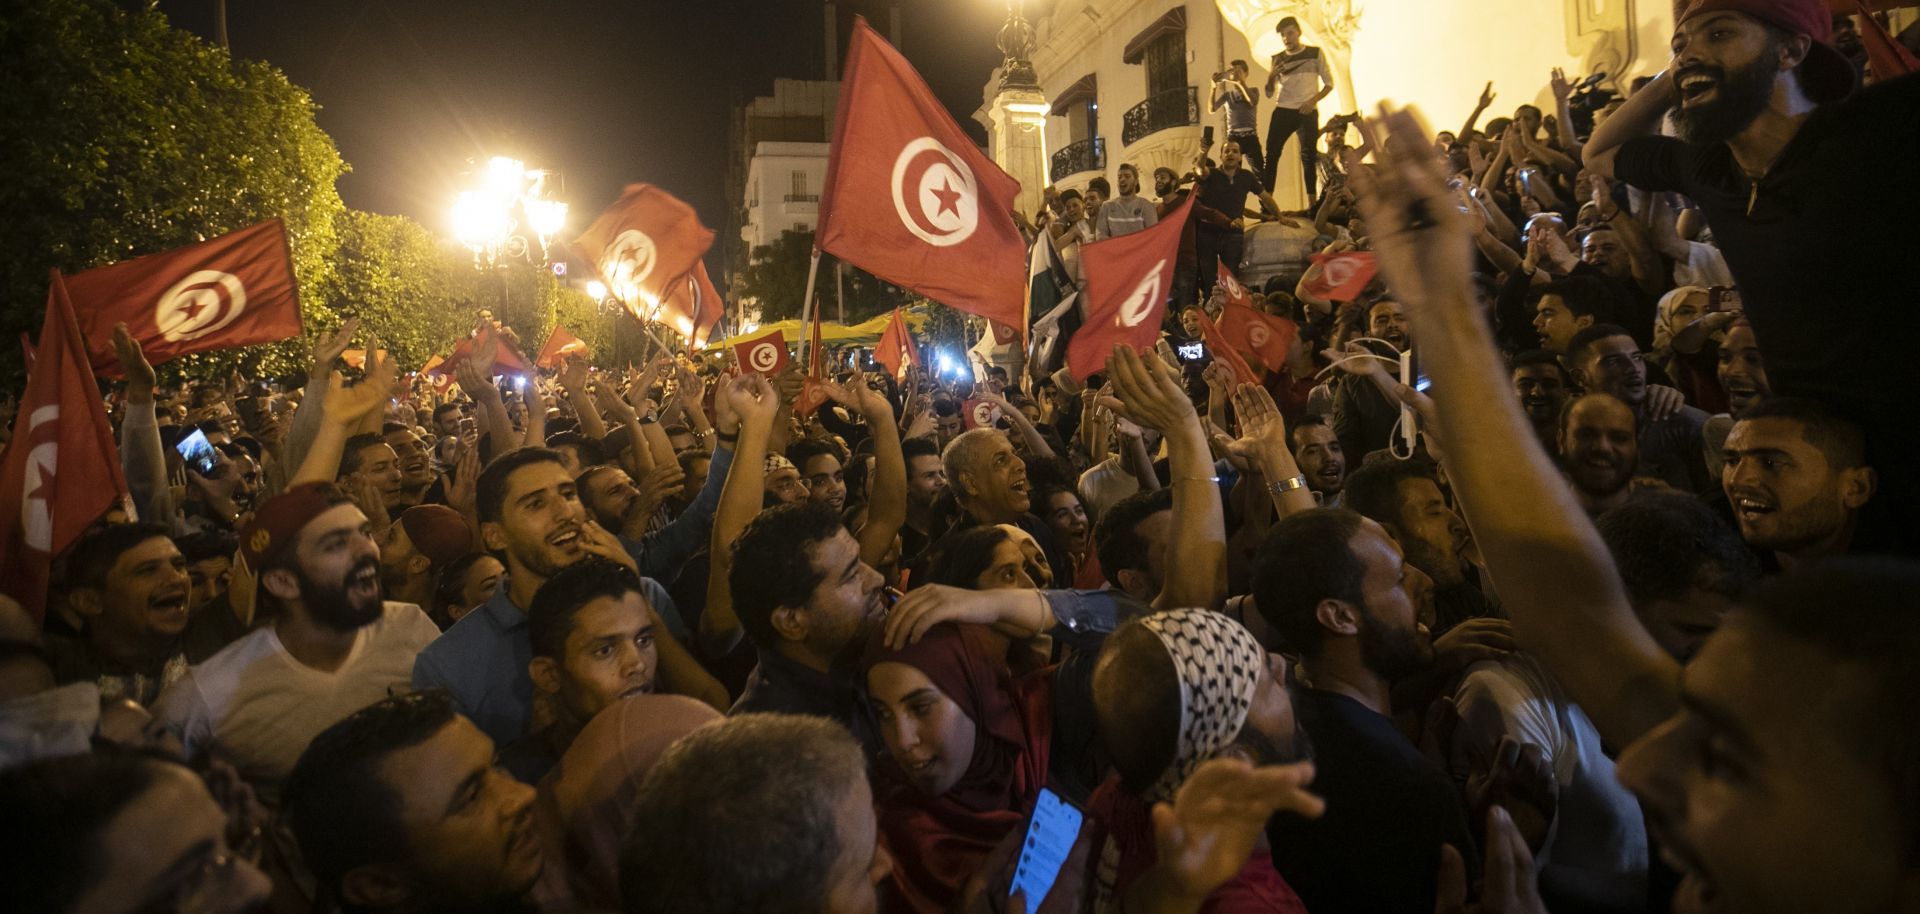 In this photo, Tunisians celebrate Kais Saied's victory in Tunisia's presidential election on Oct. 13, 2019.